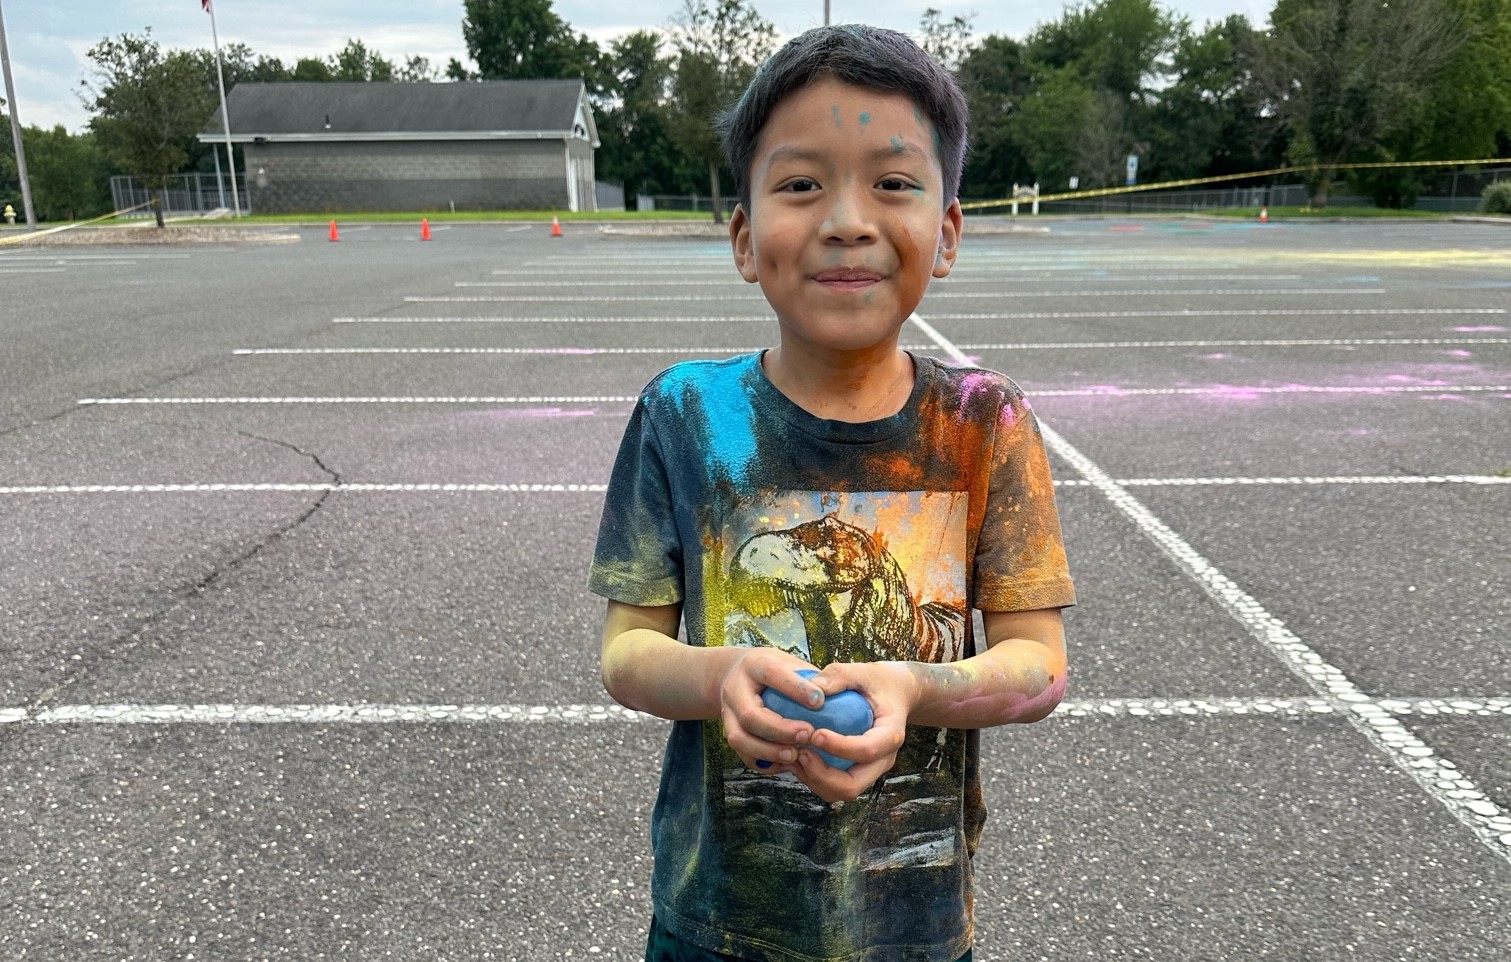 Summer Camp Color Run on Monday, July 23